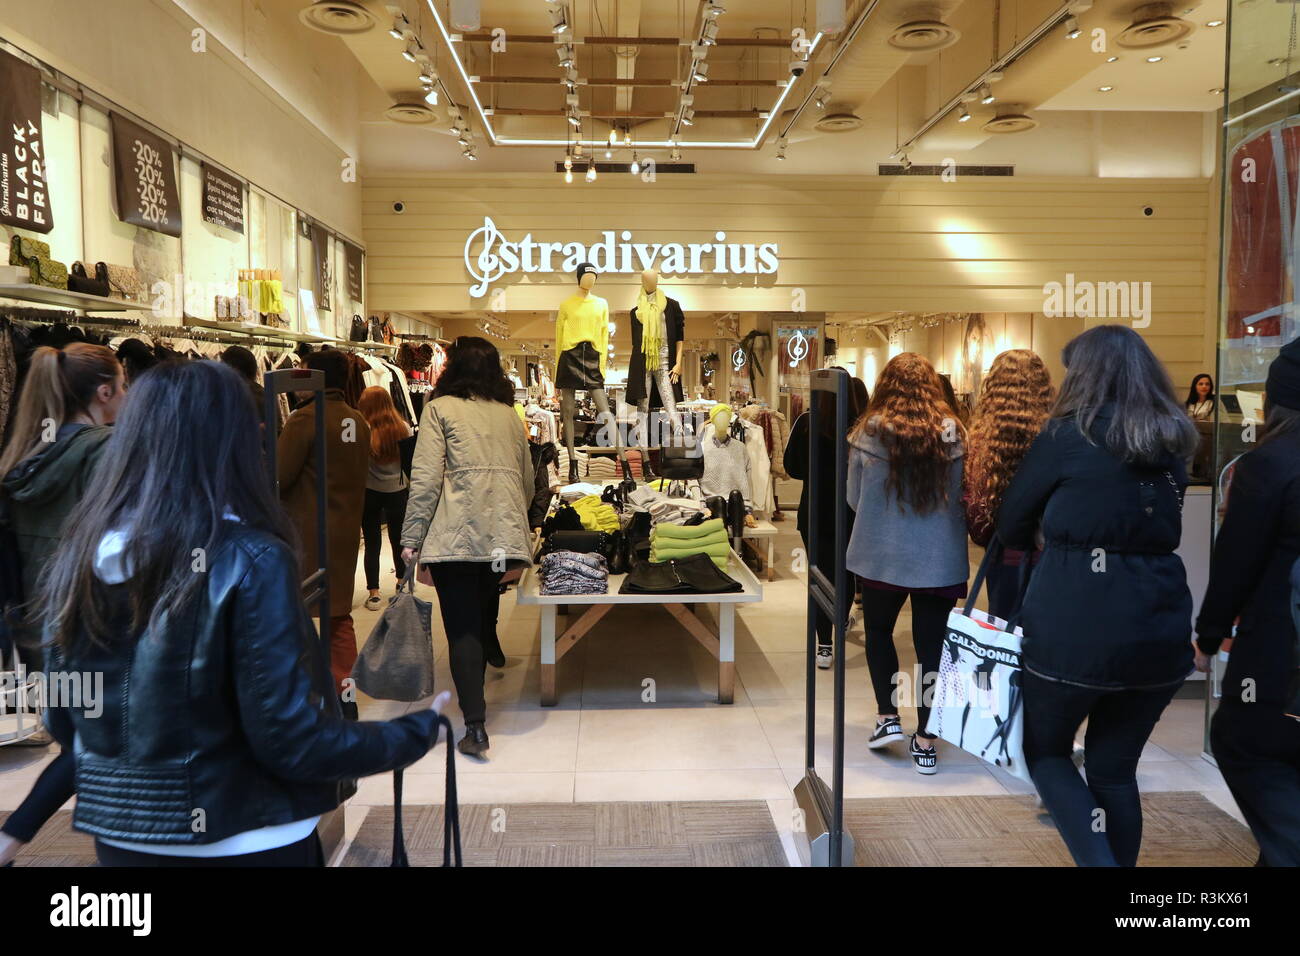 Thessaloniki, Greece, November 23rd, 2018. Shoppers Stradivarius store in Thessaloniki's Tsimisky street on Black Friday. Black Friday shopping long been a post-Thanksgiving in the US, but in Greece it's